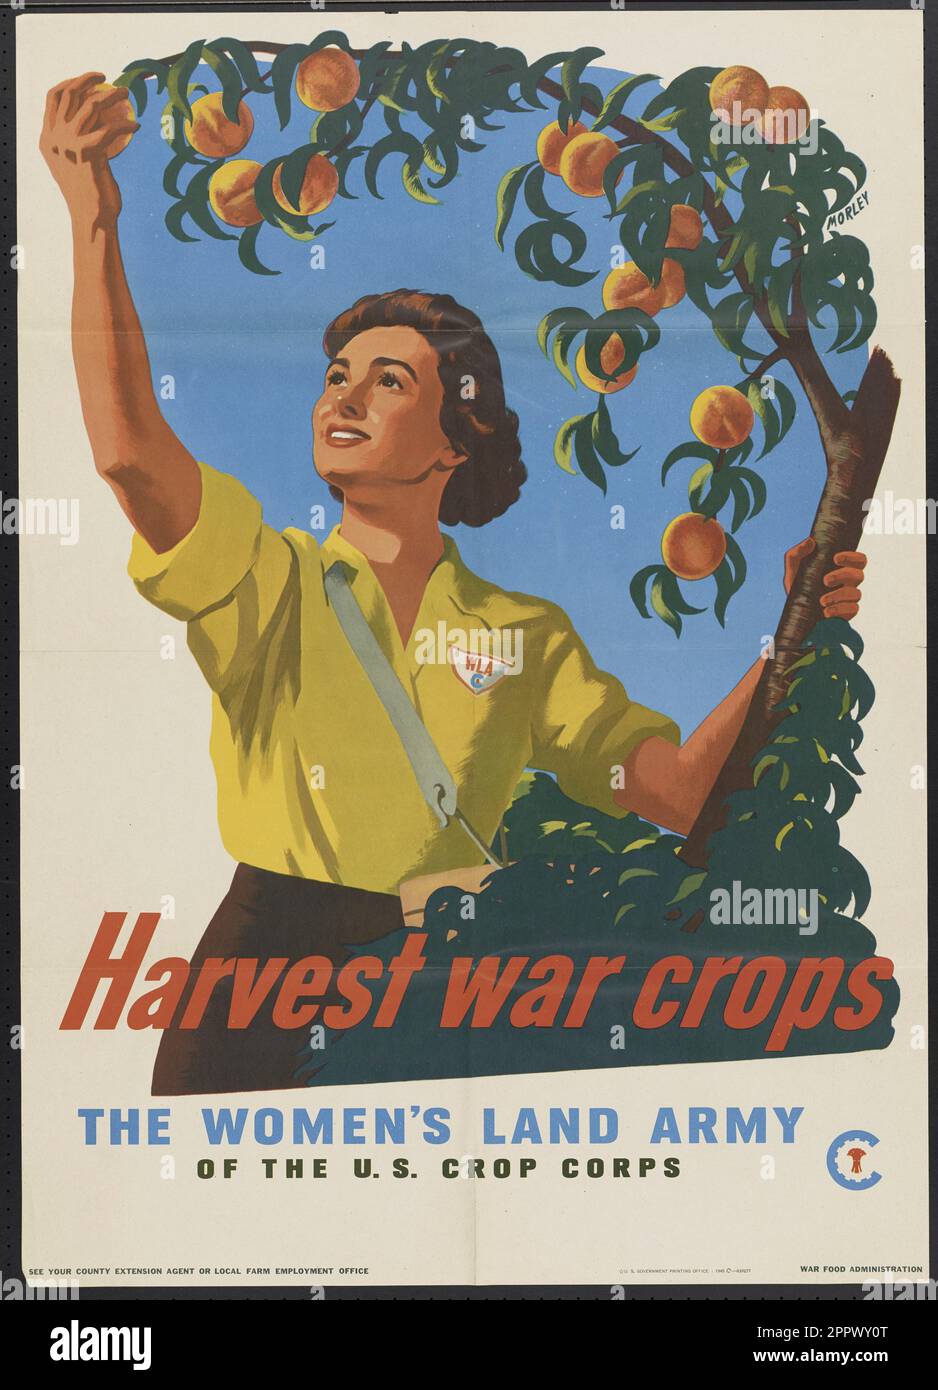 Harvest war crops the Woman's Land Army of the U.S. Crop Corps by    Morley, Hubert artist Publication date 1945 Stock Photo